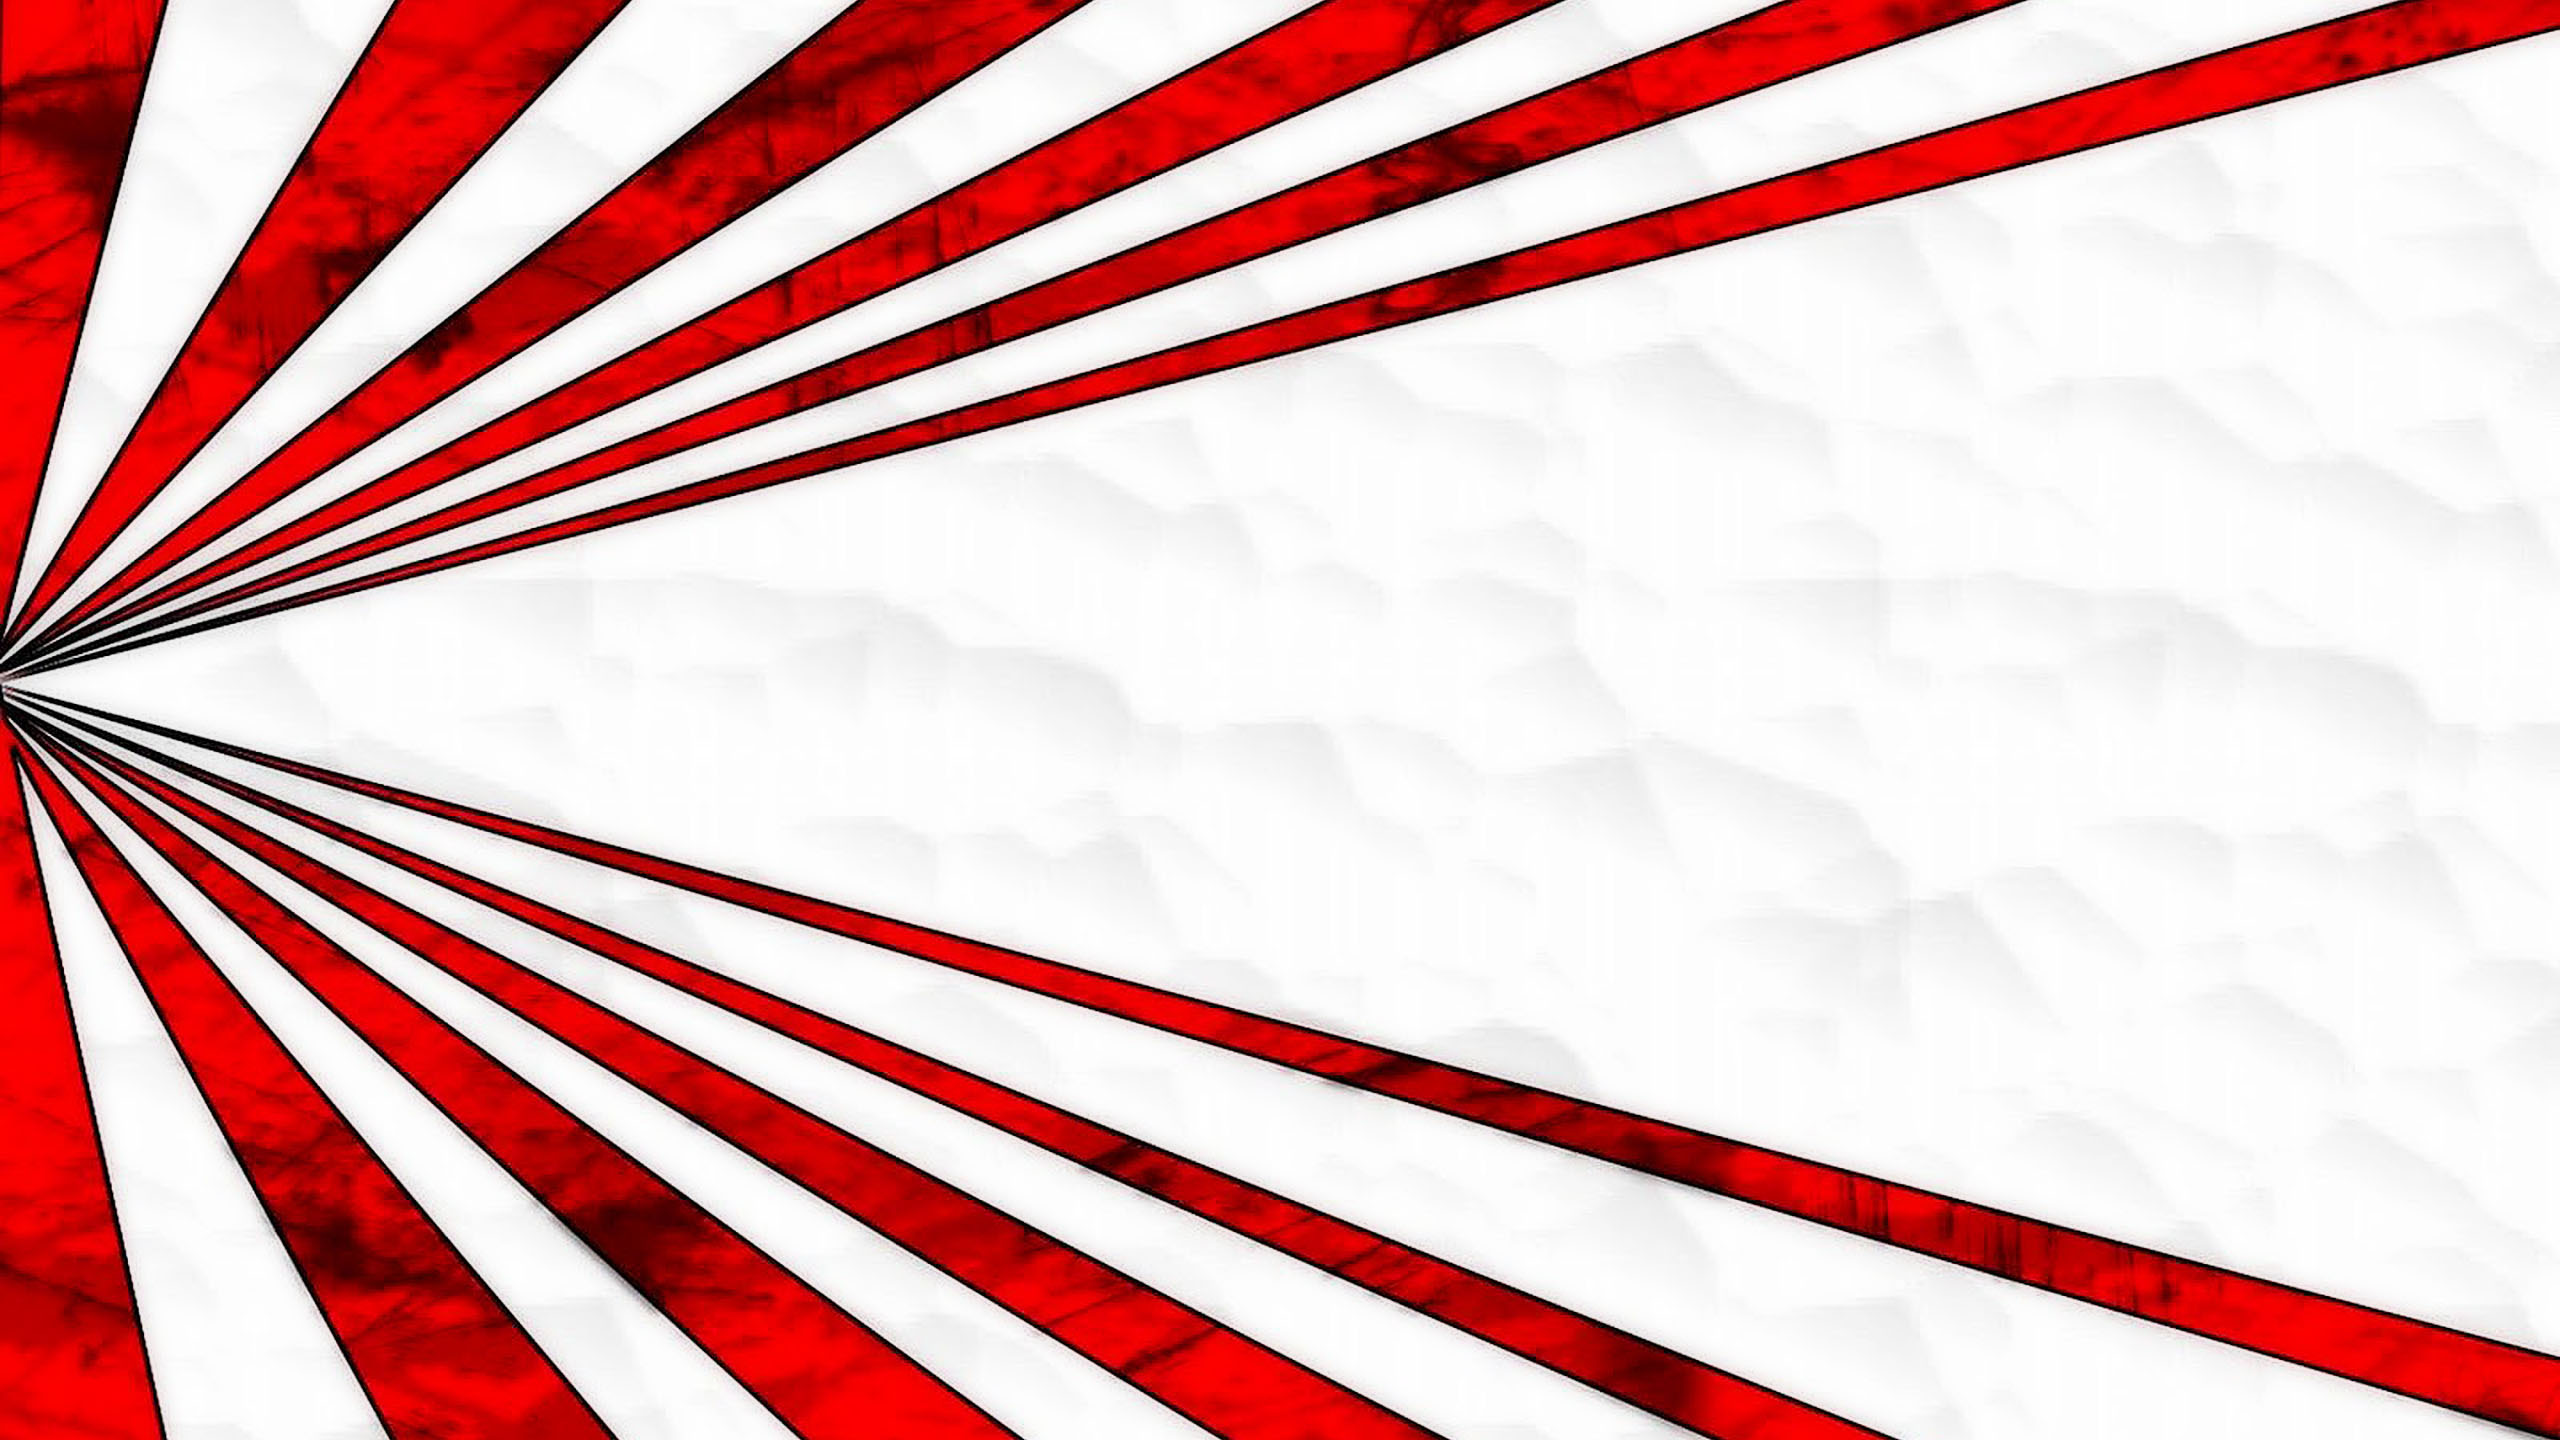 Free Download Red White And Black Backgrounds 18 Background 1600x1200